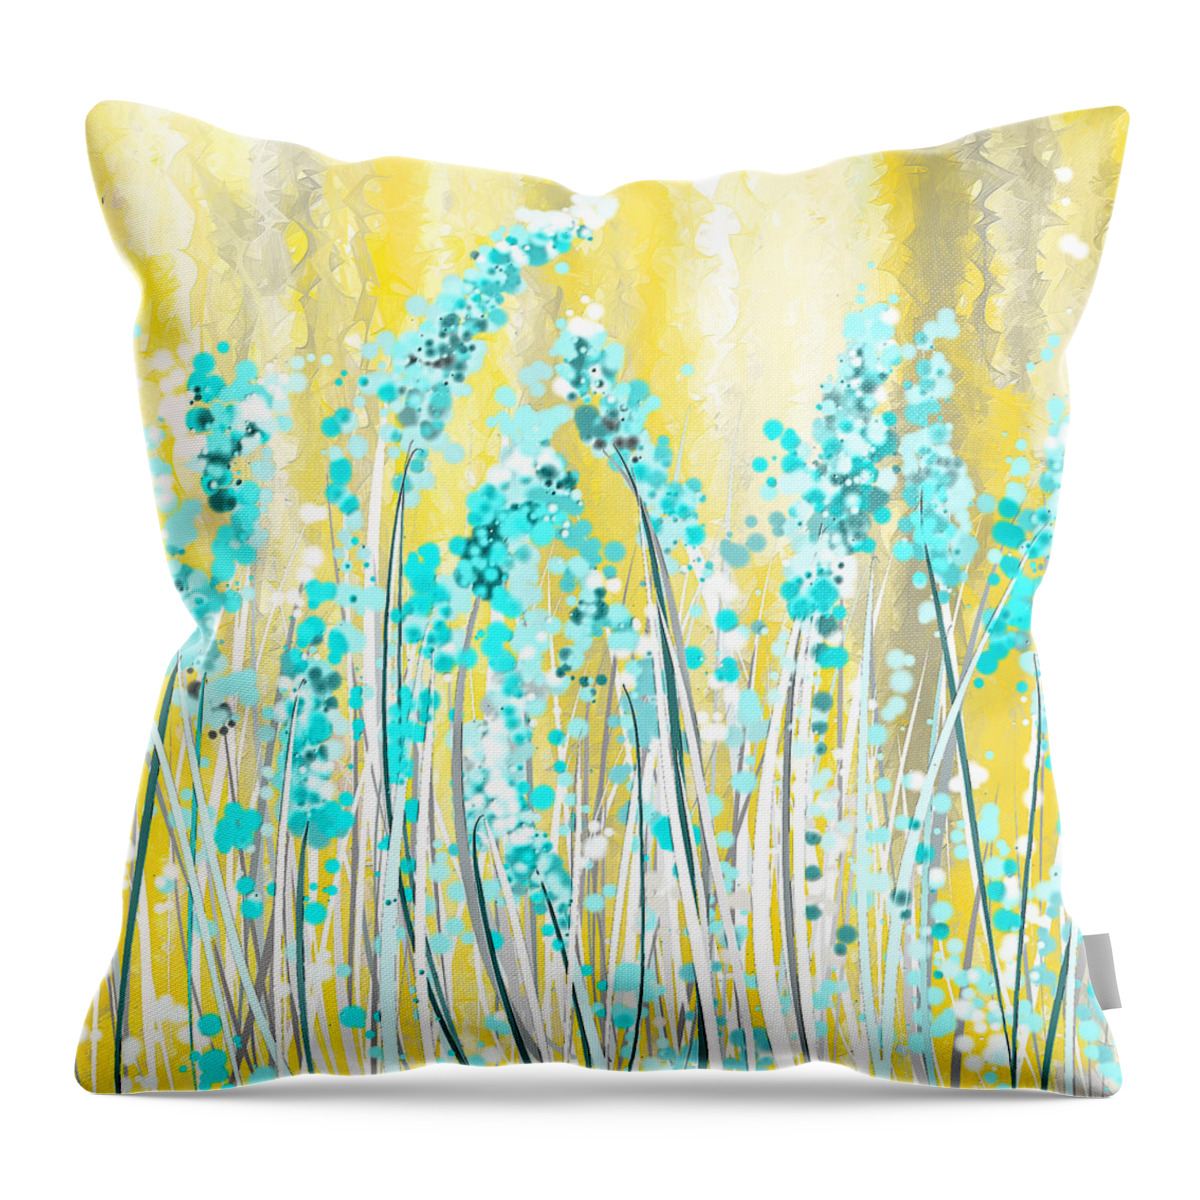 Yellow Throw Pillow featuring the painting Turquoise And Yellow by Lourry Legarde